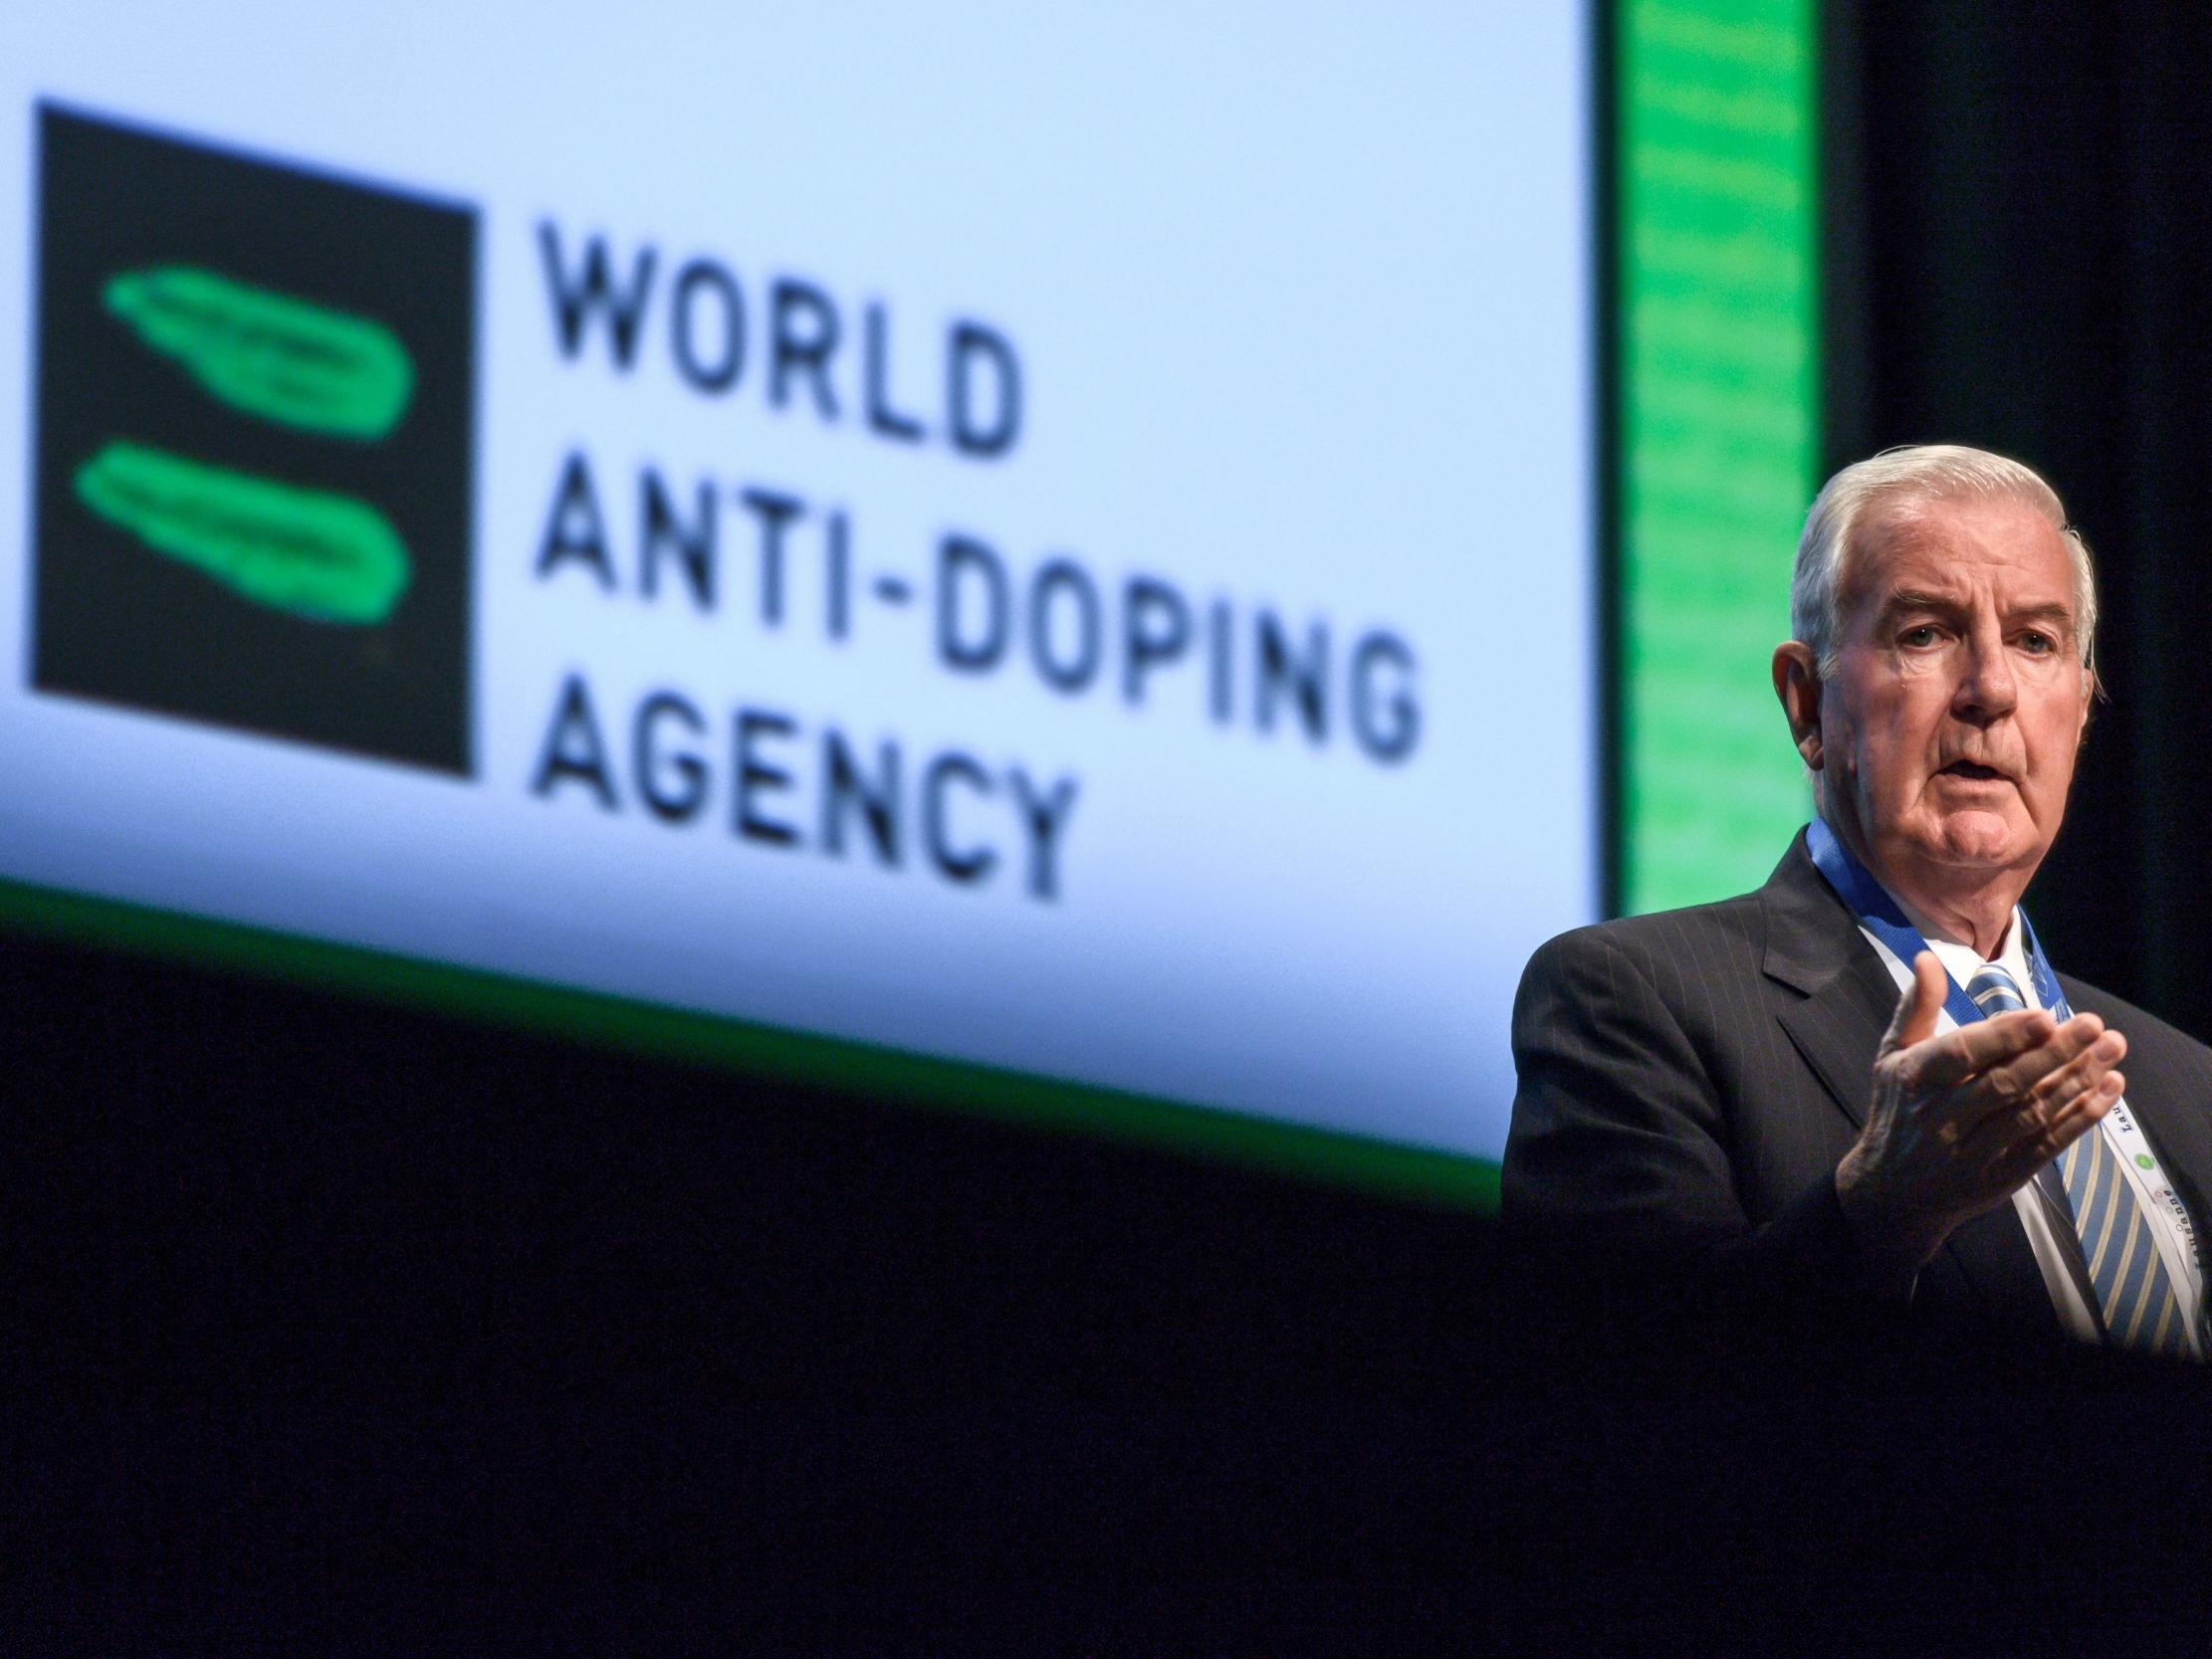 Wada has softened its stance to reach an agreement